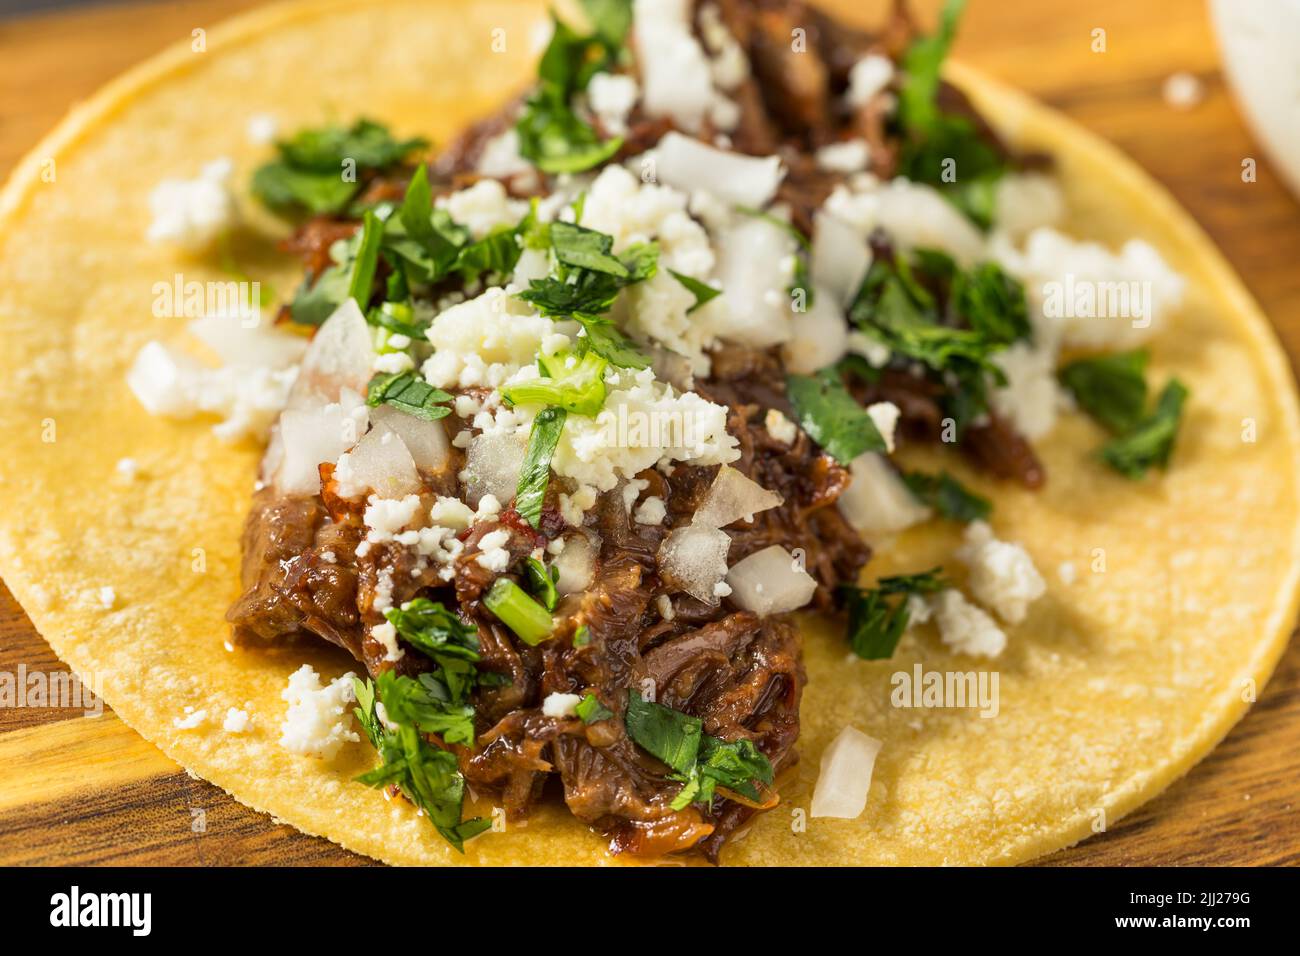 Homemade Mexican Shredded Beef Tacos with Onion and Cheese Stock Photo